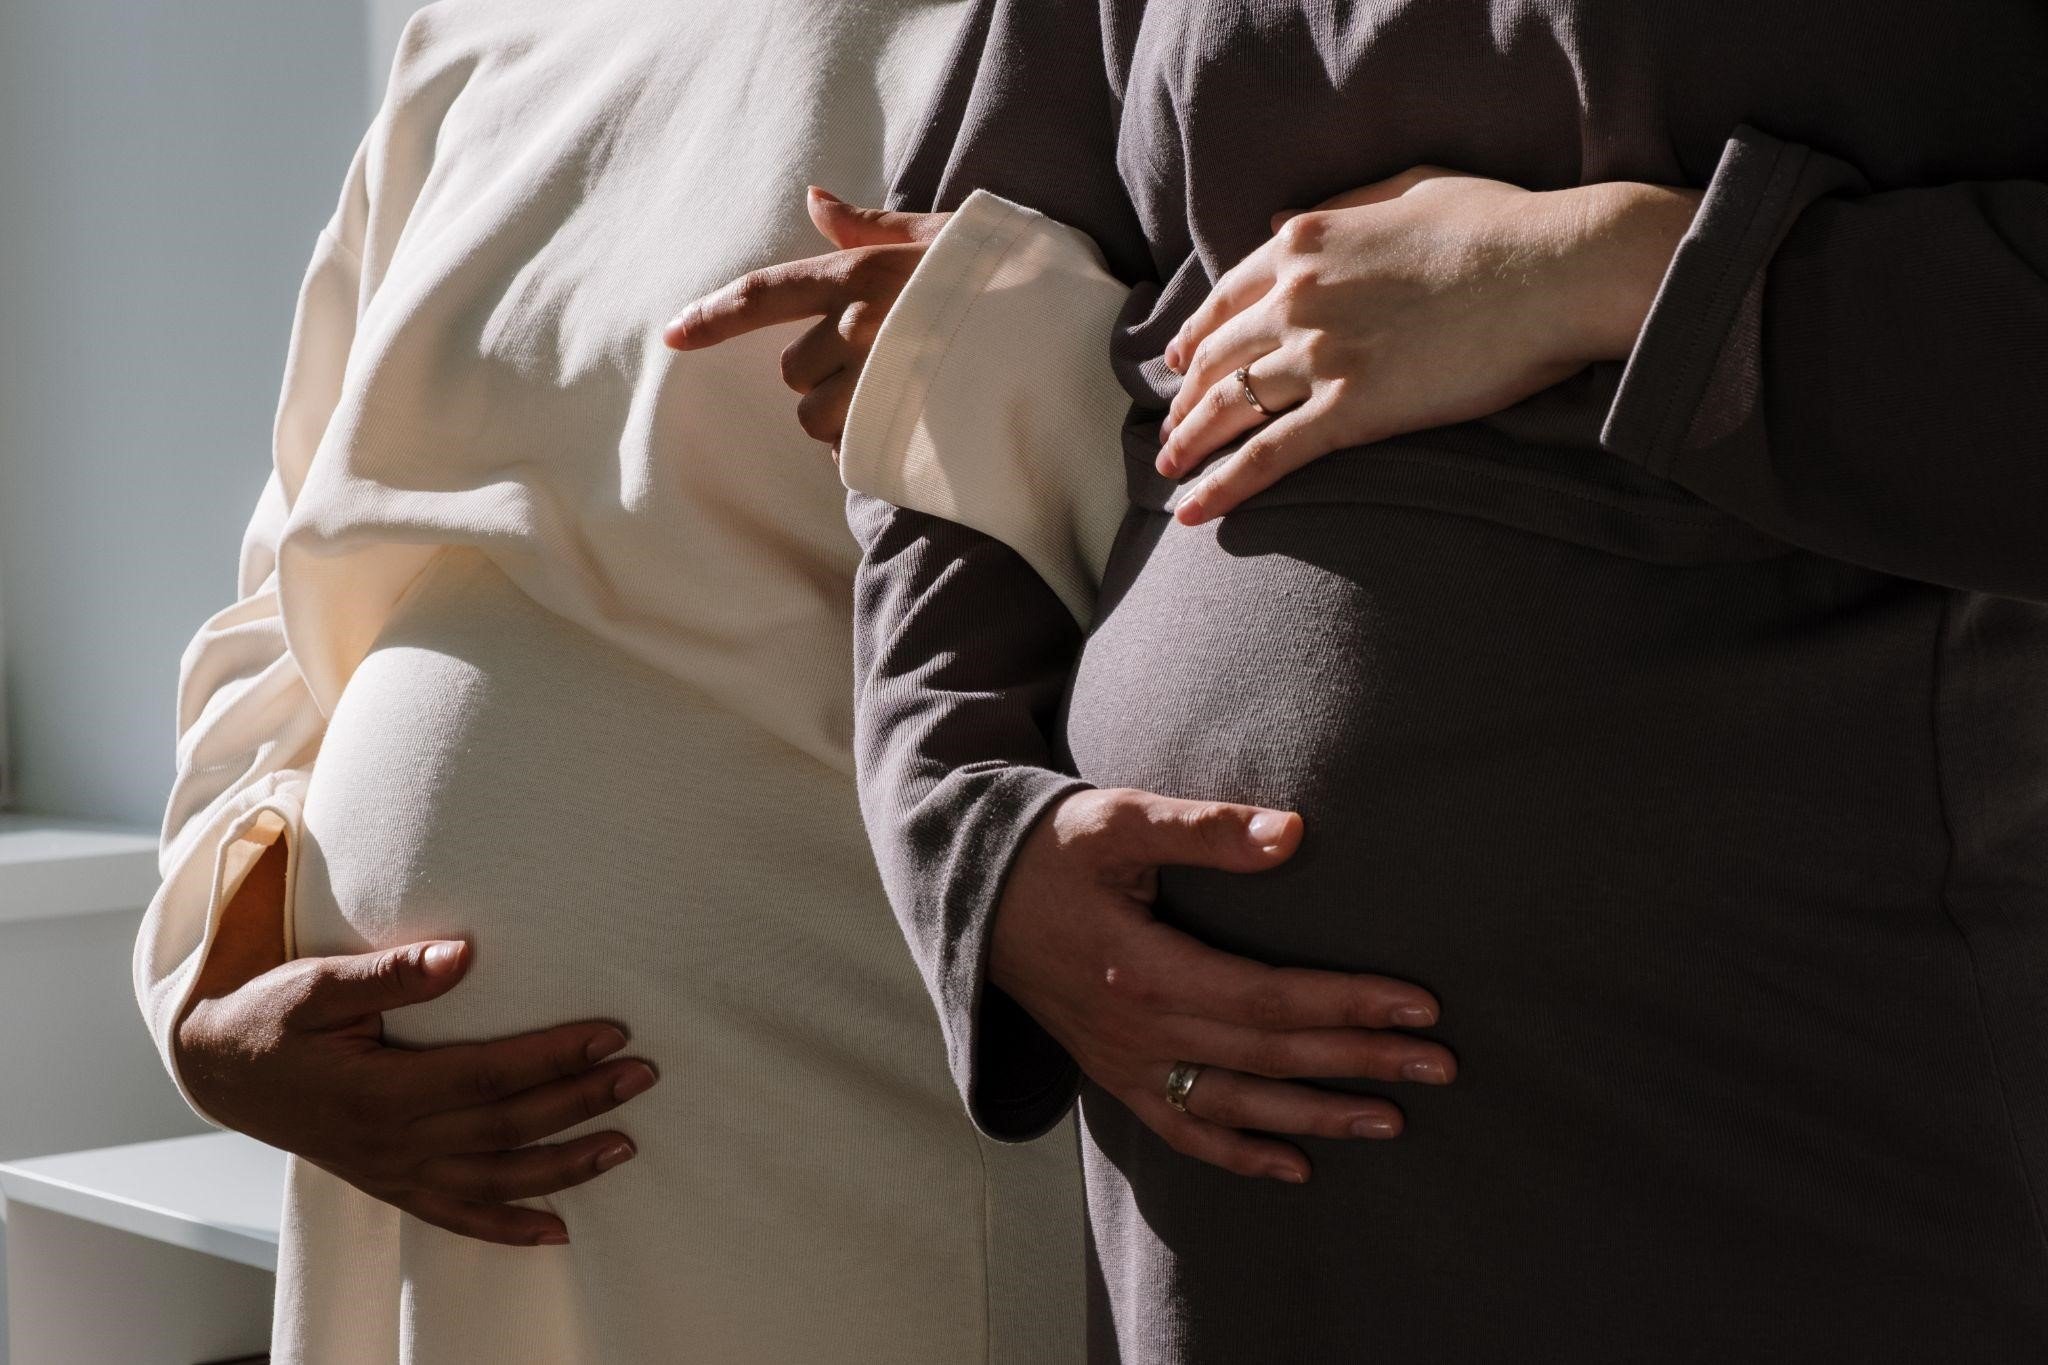 How Much Do Surrogate Moms Get Paid